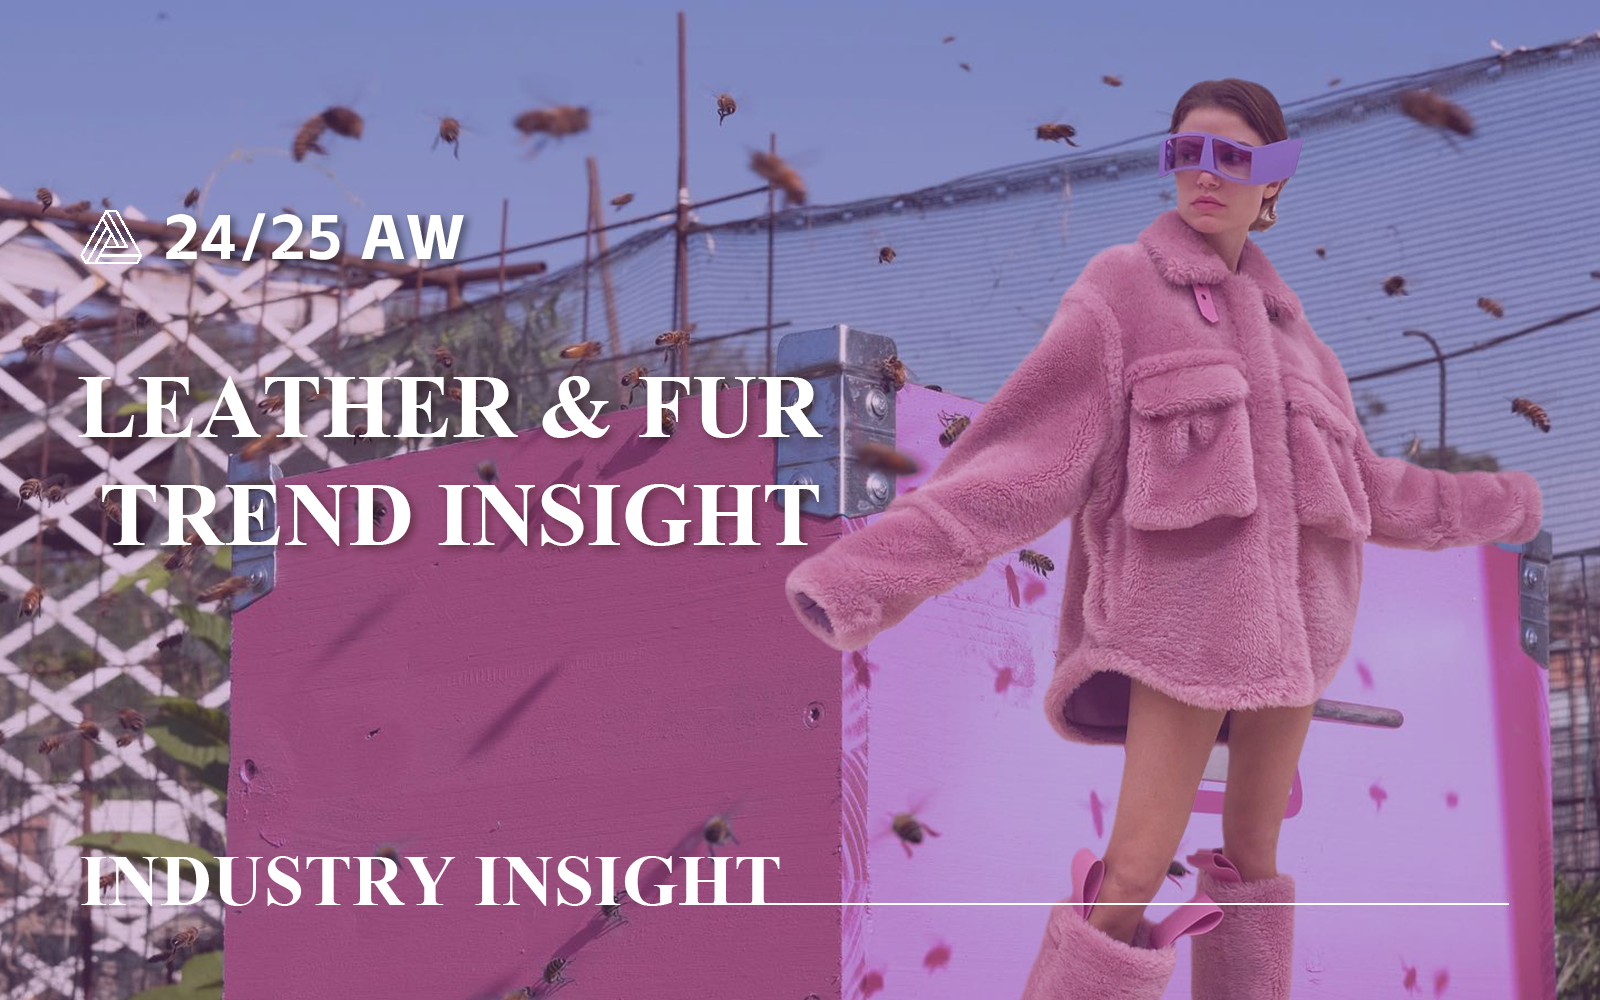 A/W 24/25 Leather & Fur Industry Insight